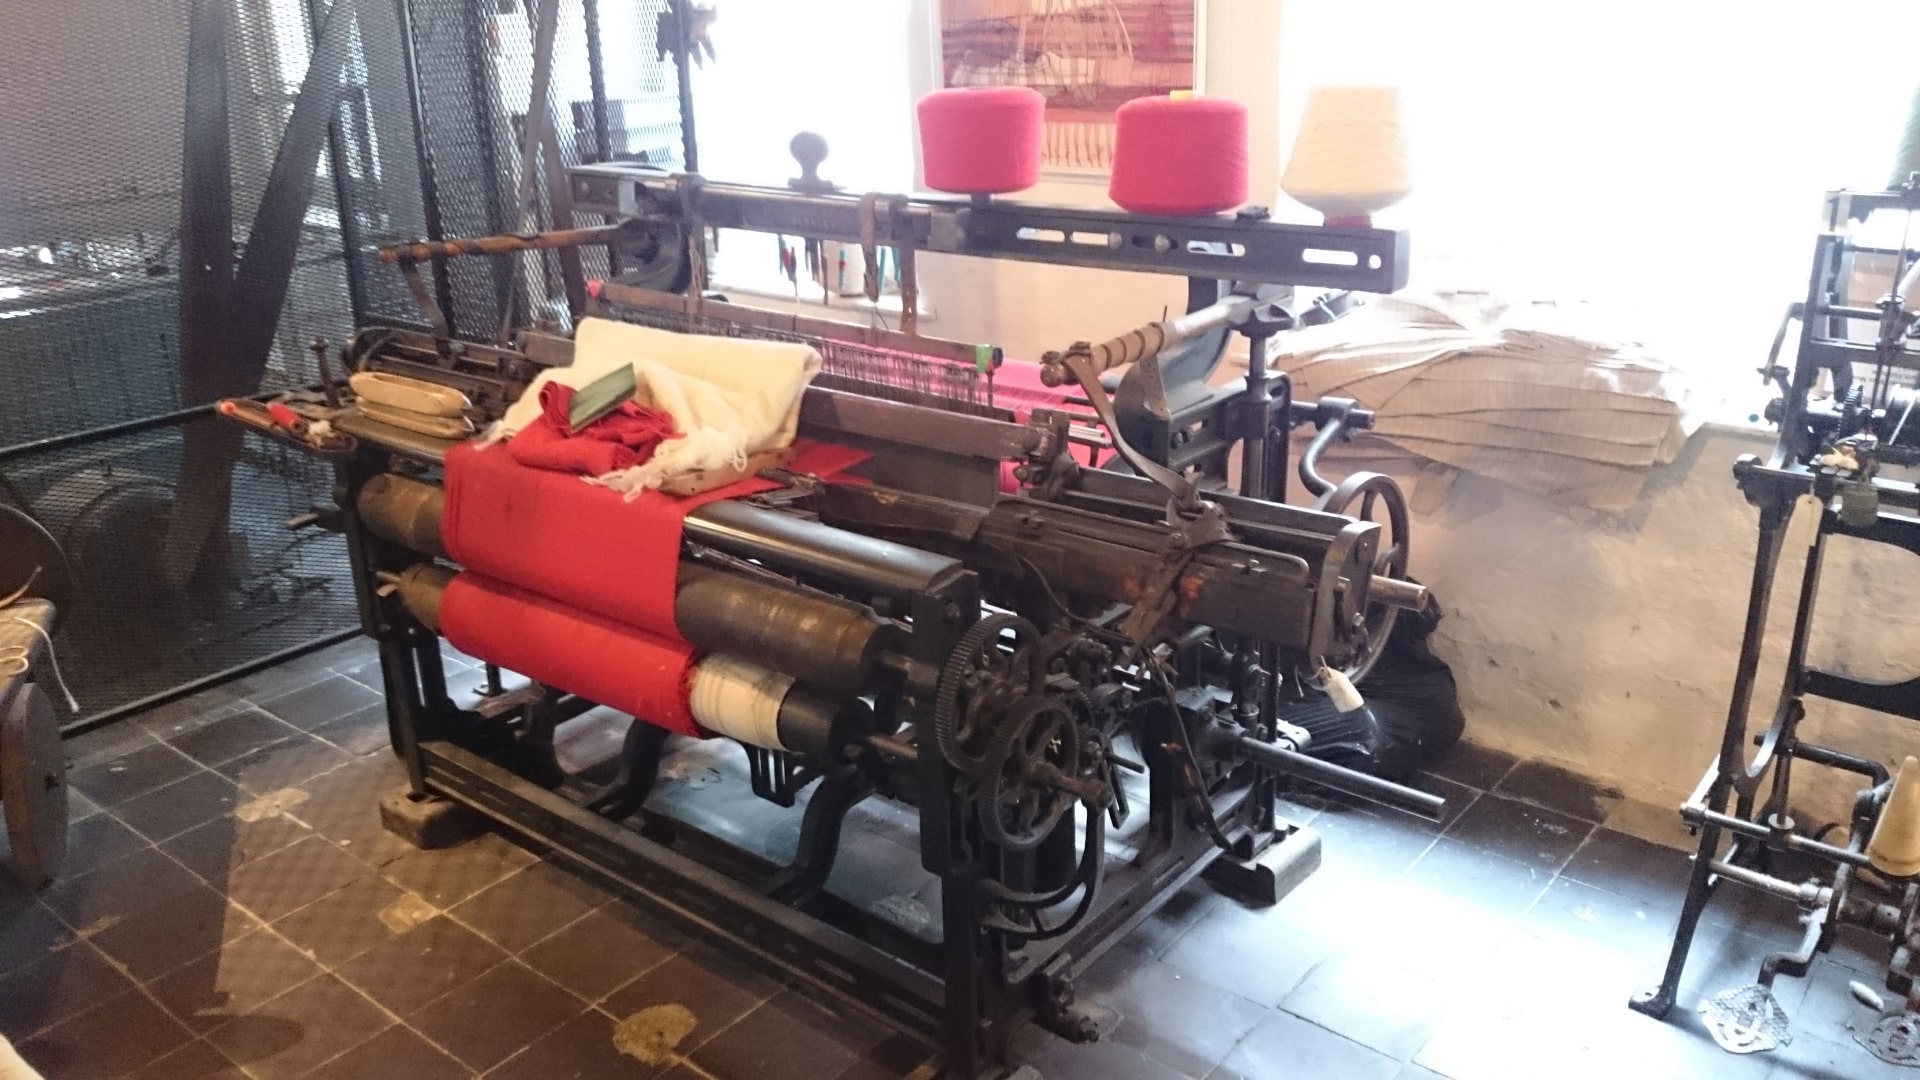 Historic Machinery at the National Wool Museum